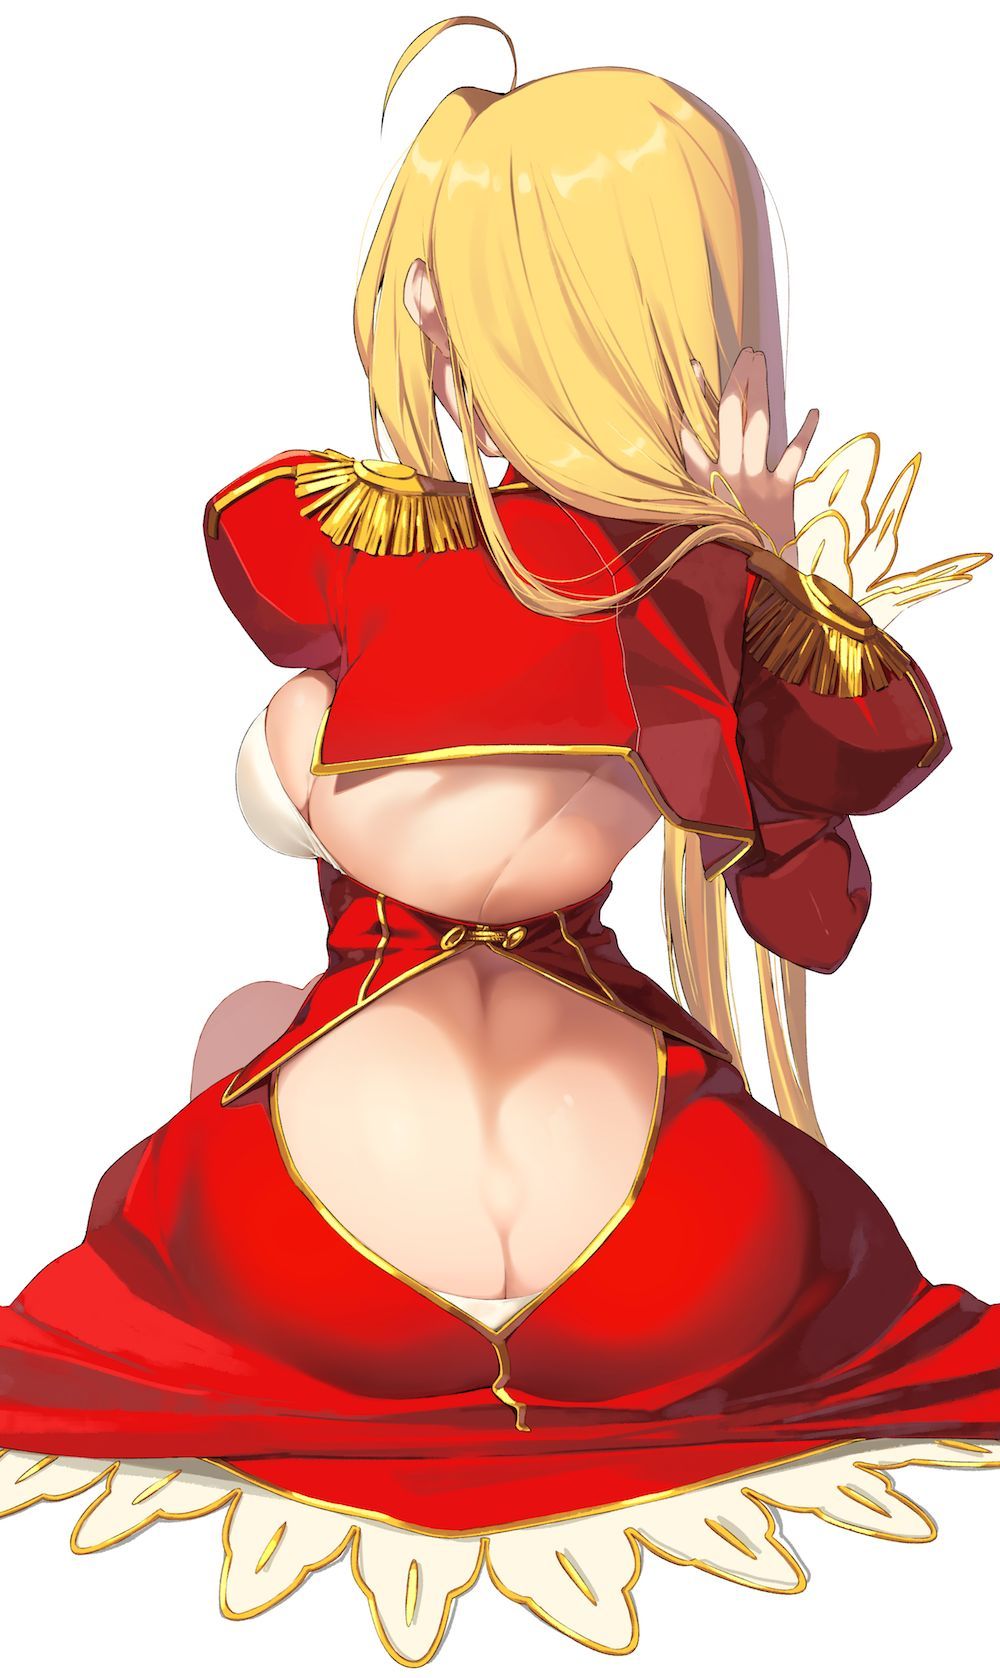 【Secondary】 Fate/Grand Order (Fate/EXTRA-CCC), Nero Claudius' love images summary! No.16 [20 sheets] 14